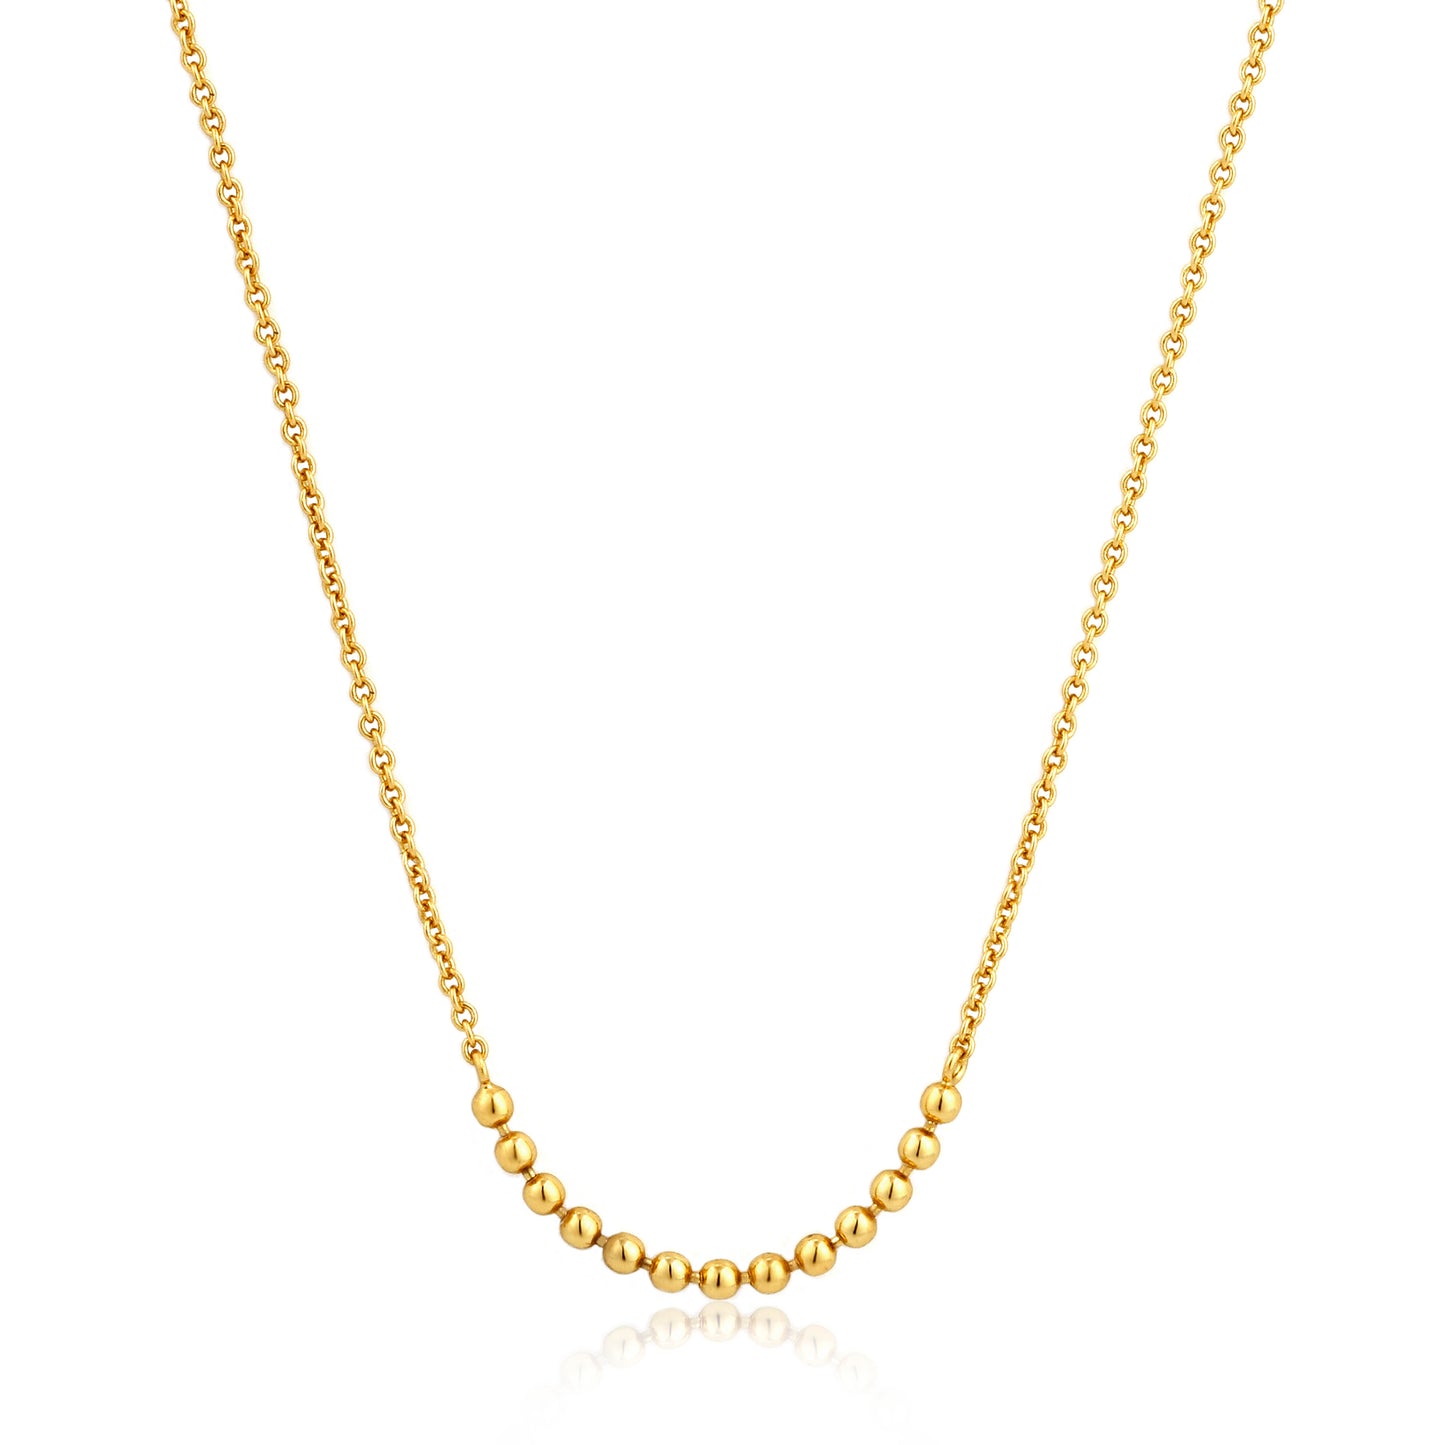 ANIA HAIE ANIA HAIE - Gold Modern Multiple Balls Necklace available at The Good Life Boutique